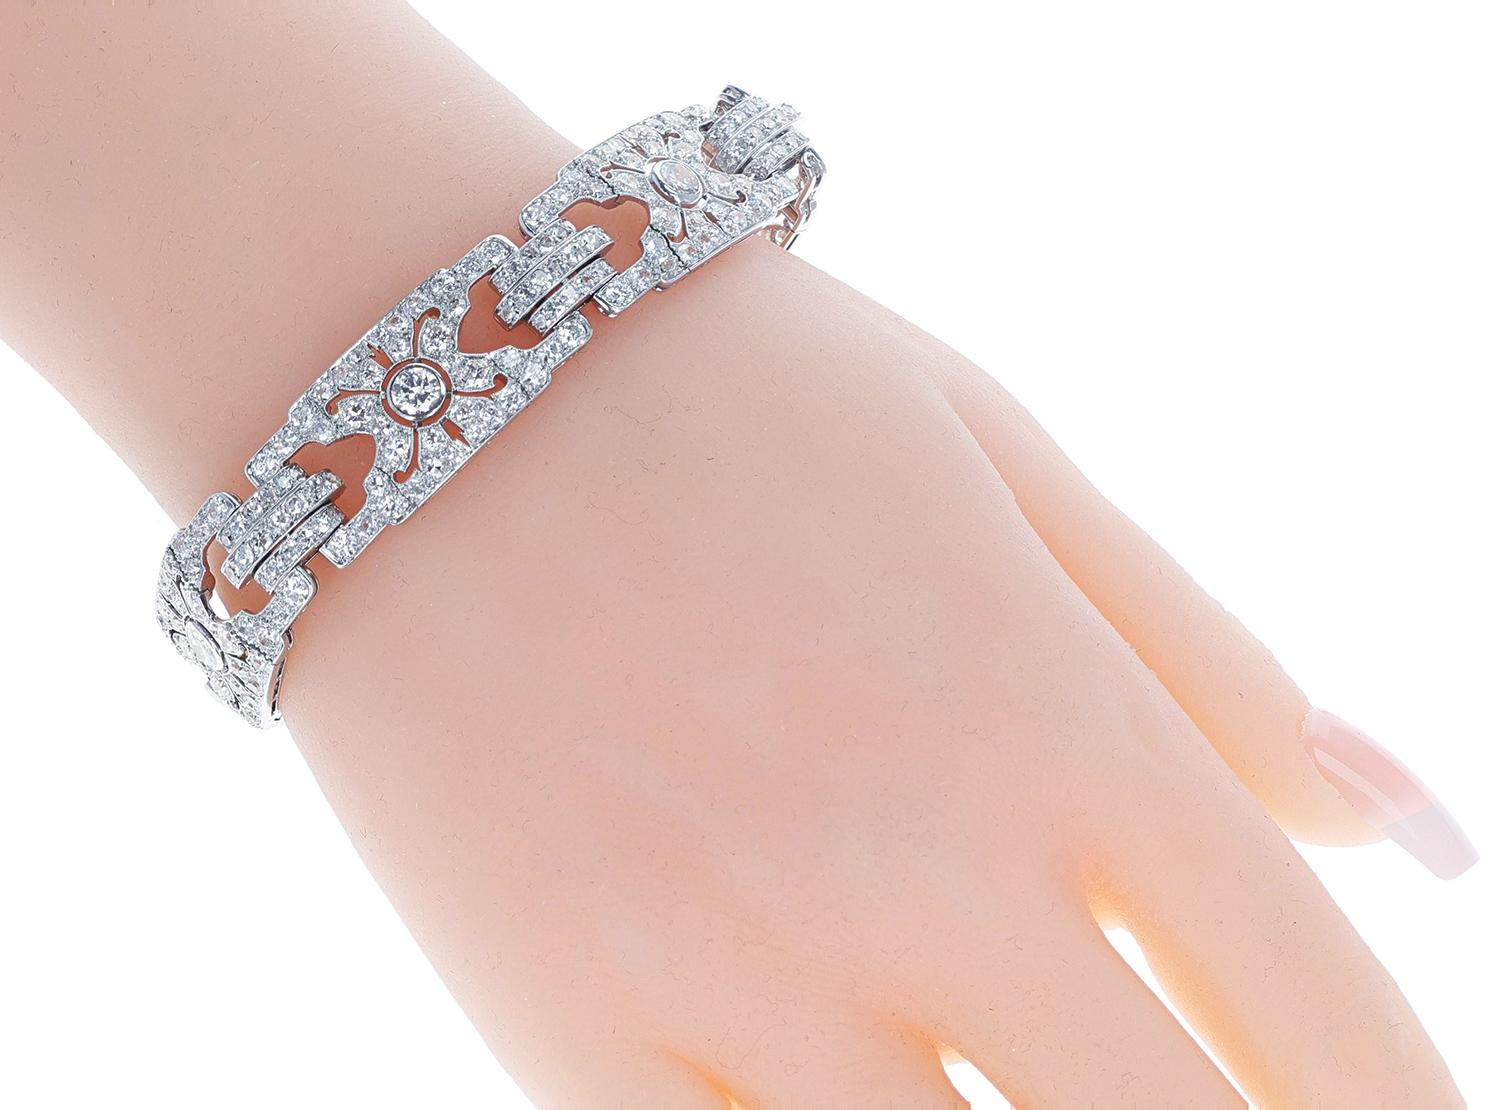 An Art Deco Cartier Paris Diamond Bracelet with French Marks Numbered and made in Platinum. The total diamond weight is appx. 20 carats. The total weight of the bracelet is 39.60 grams. The total length is 7 3/8 inches.
